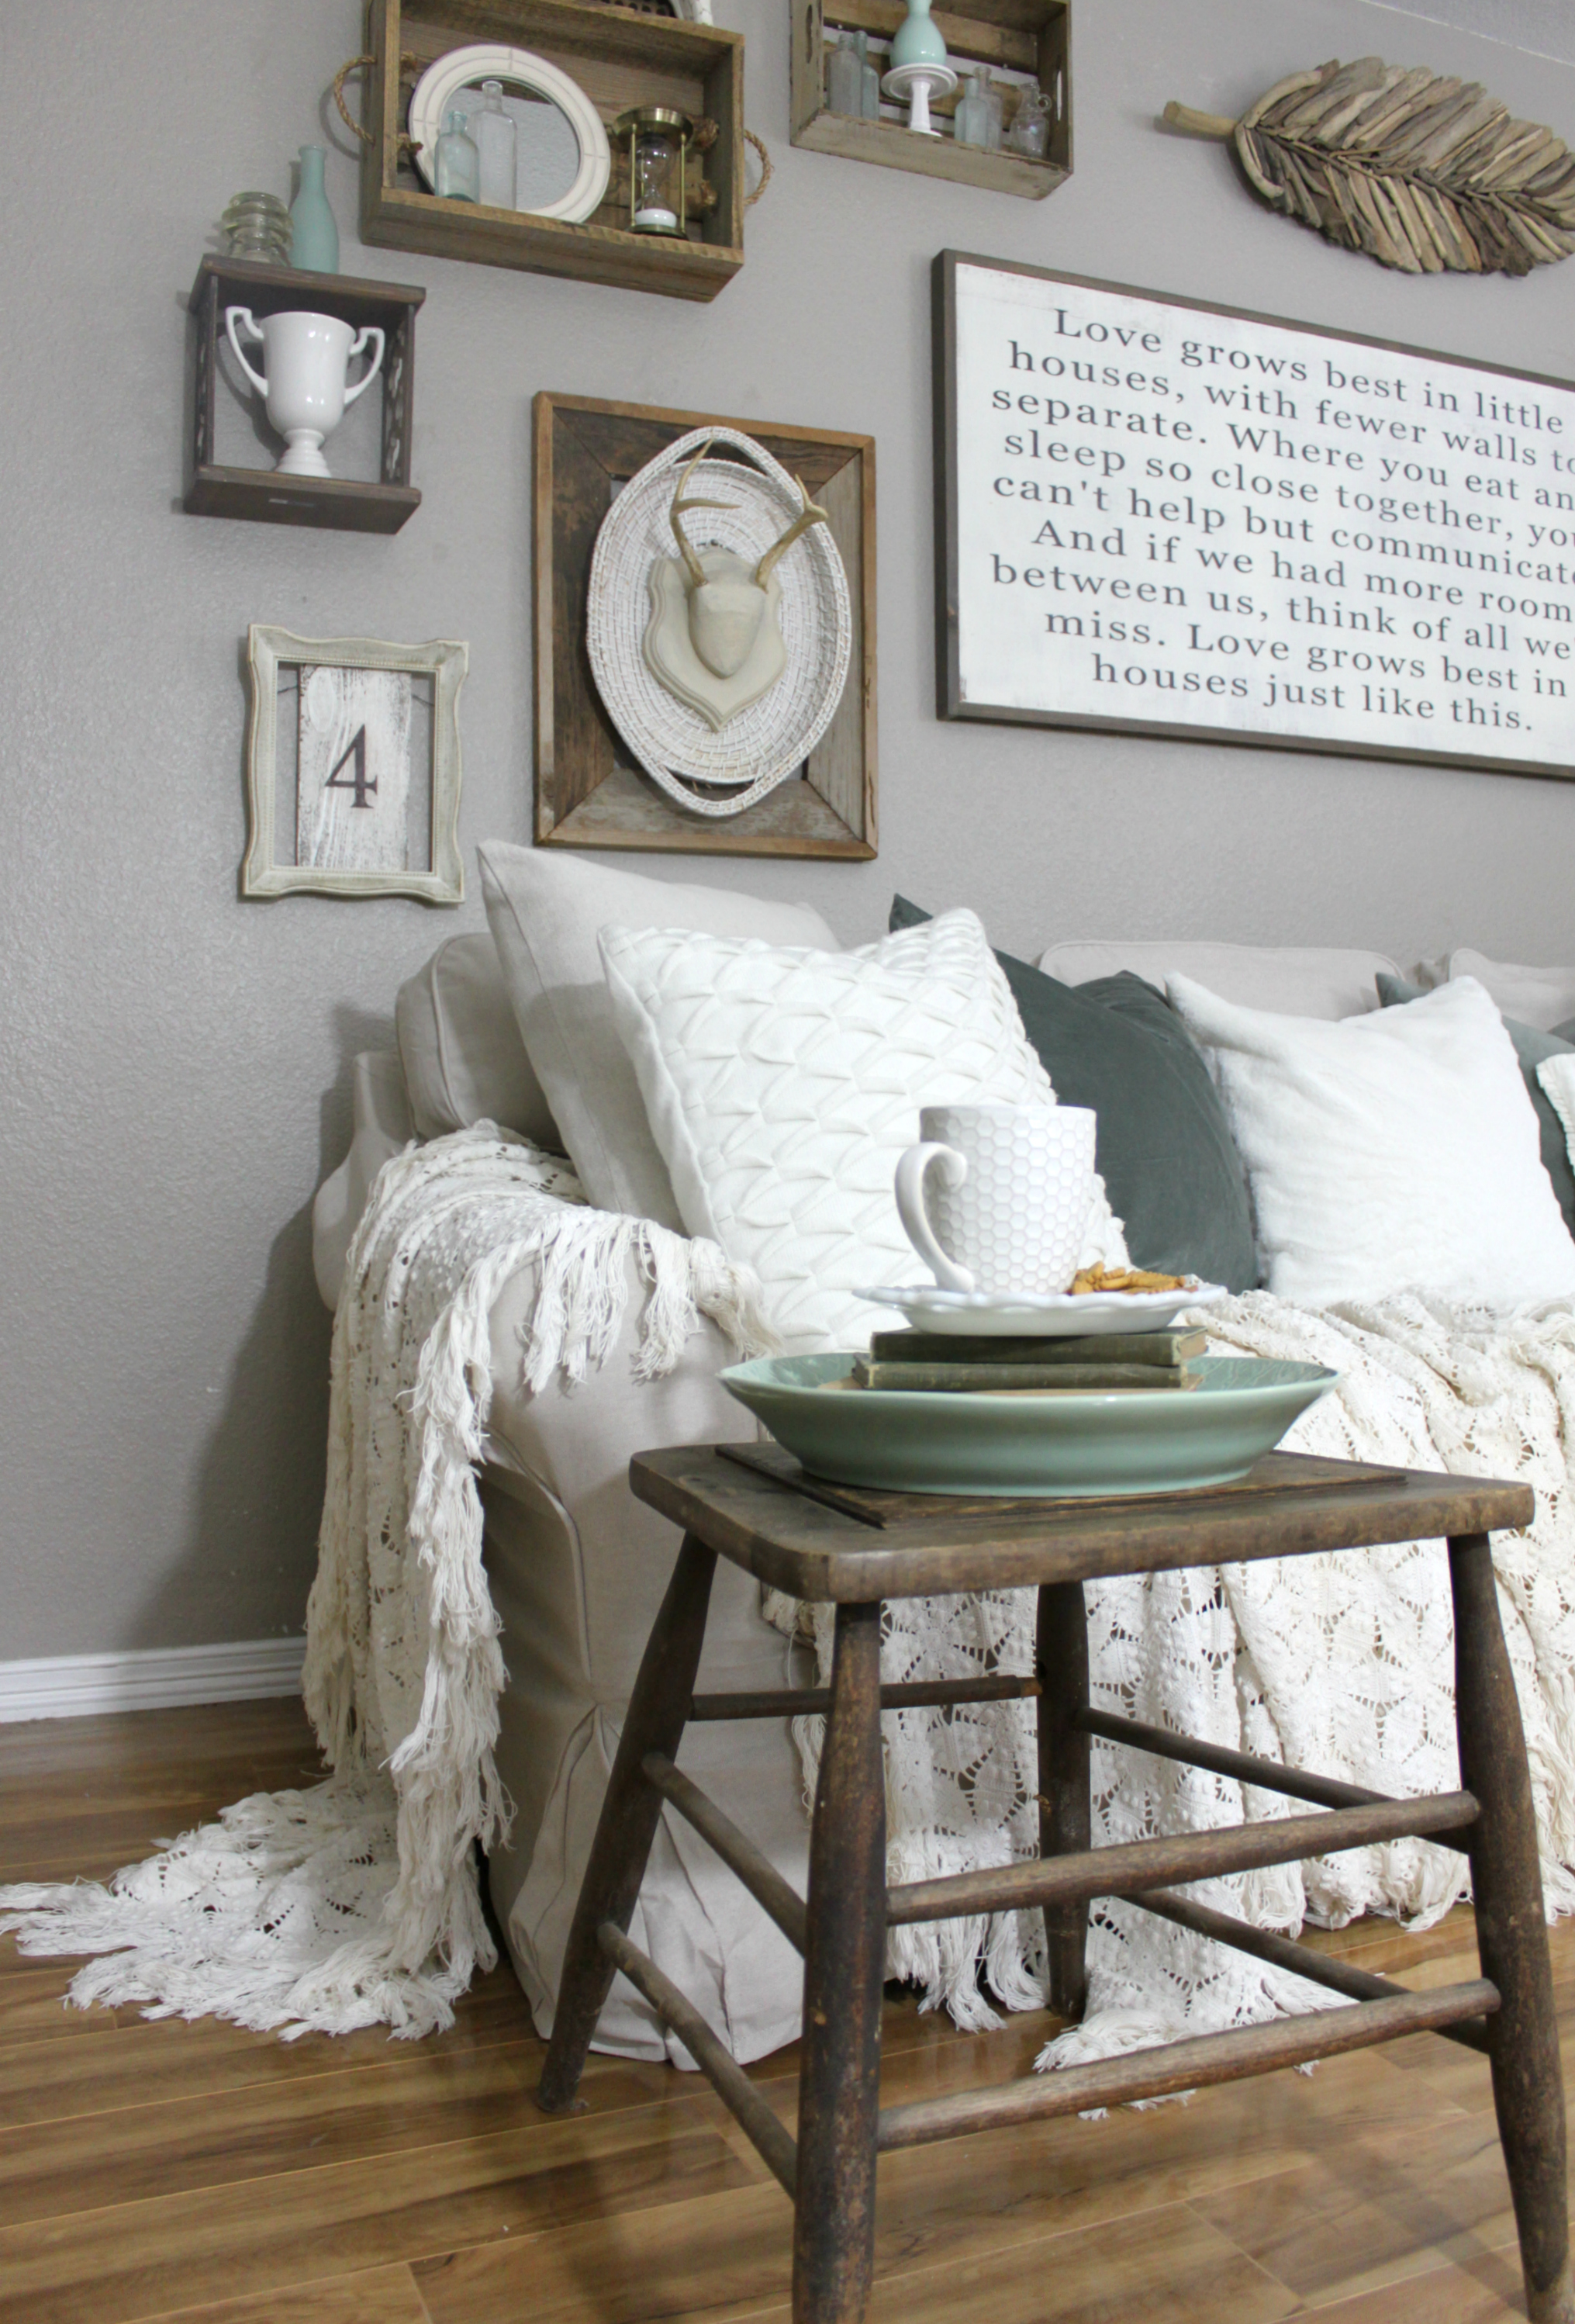 How to Add a Pop of Color to Neutral Decor | An Inspired Nest